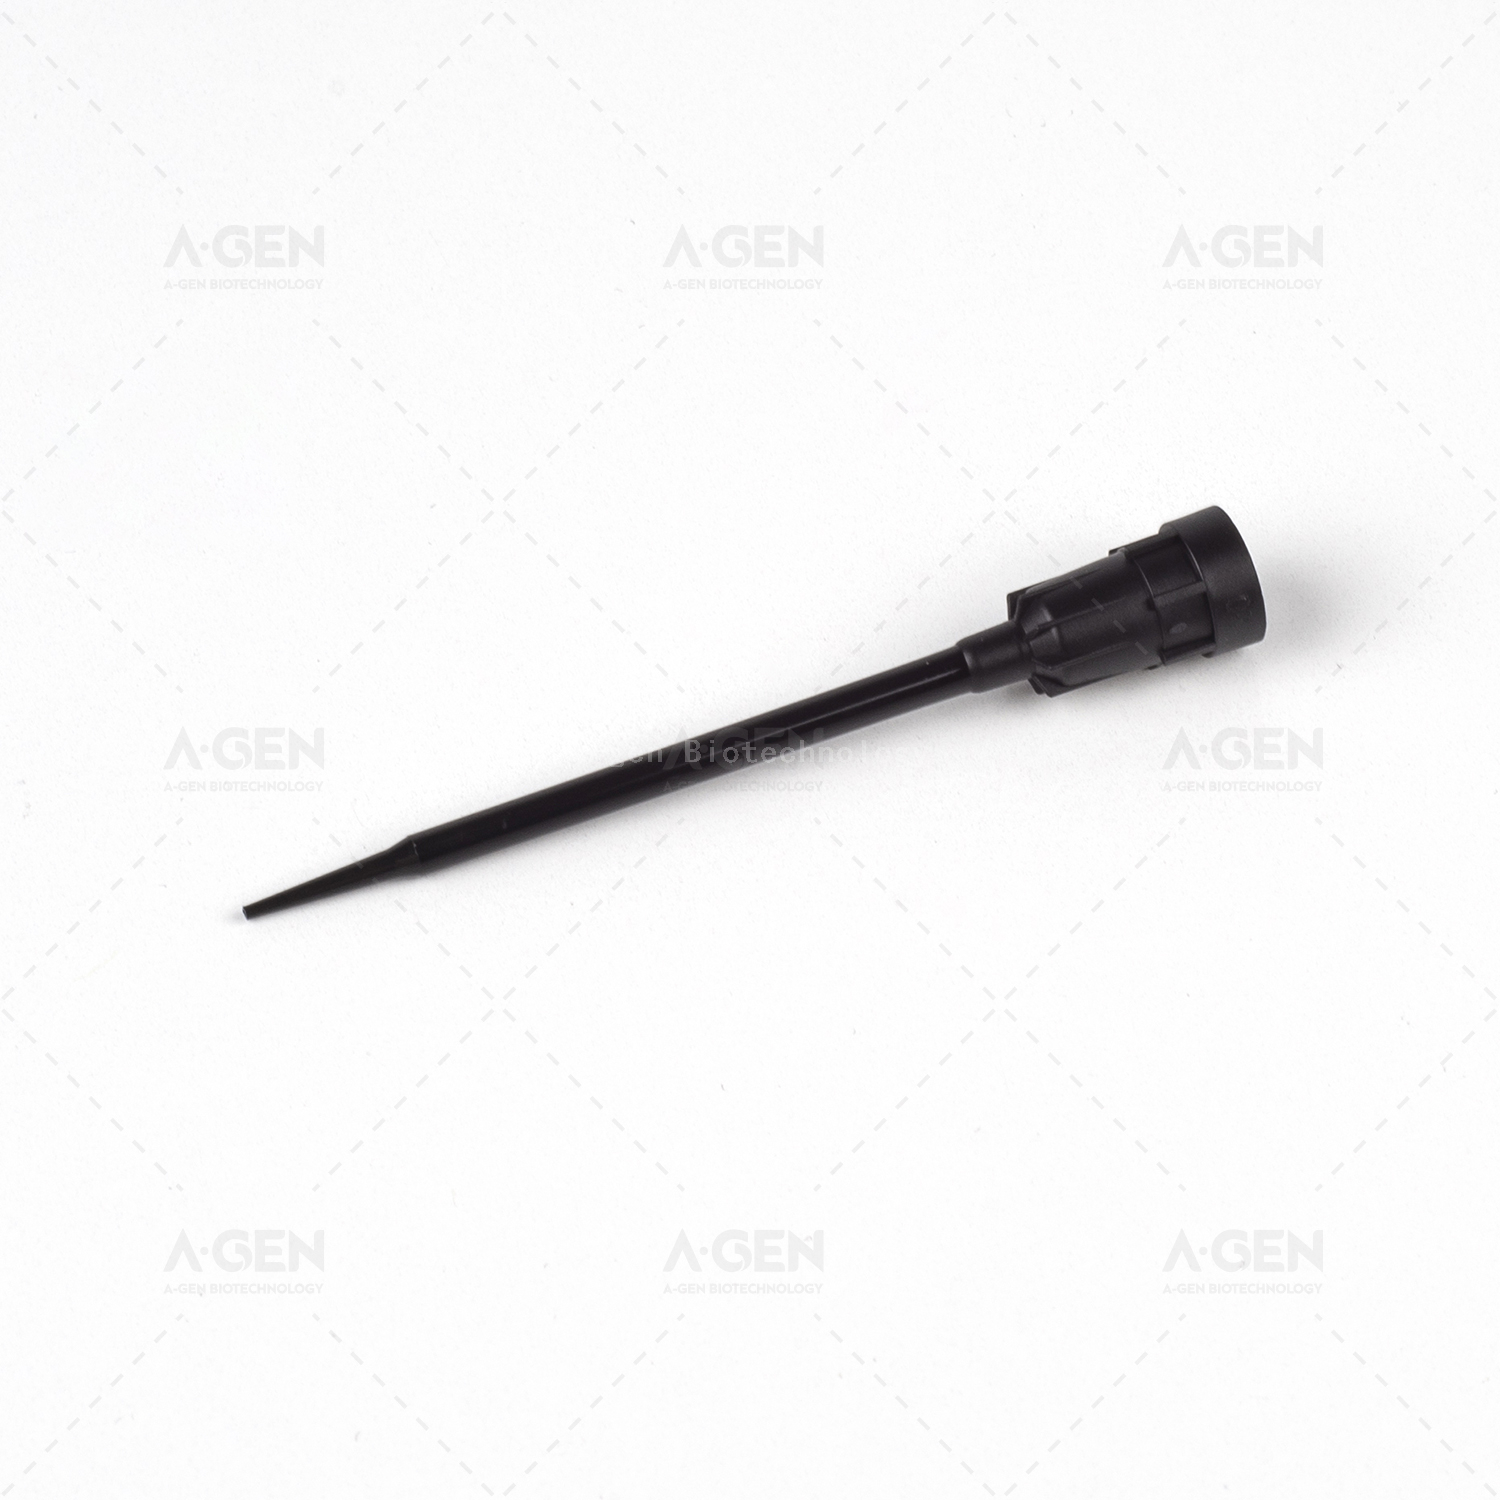 Tecan LiHa Conductive 50μL PP Pipette Tip (Racked,sterilized) without Filter TT-50C-RSL Low Retention